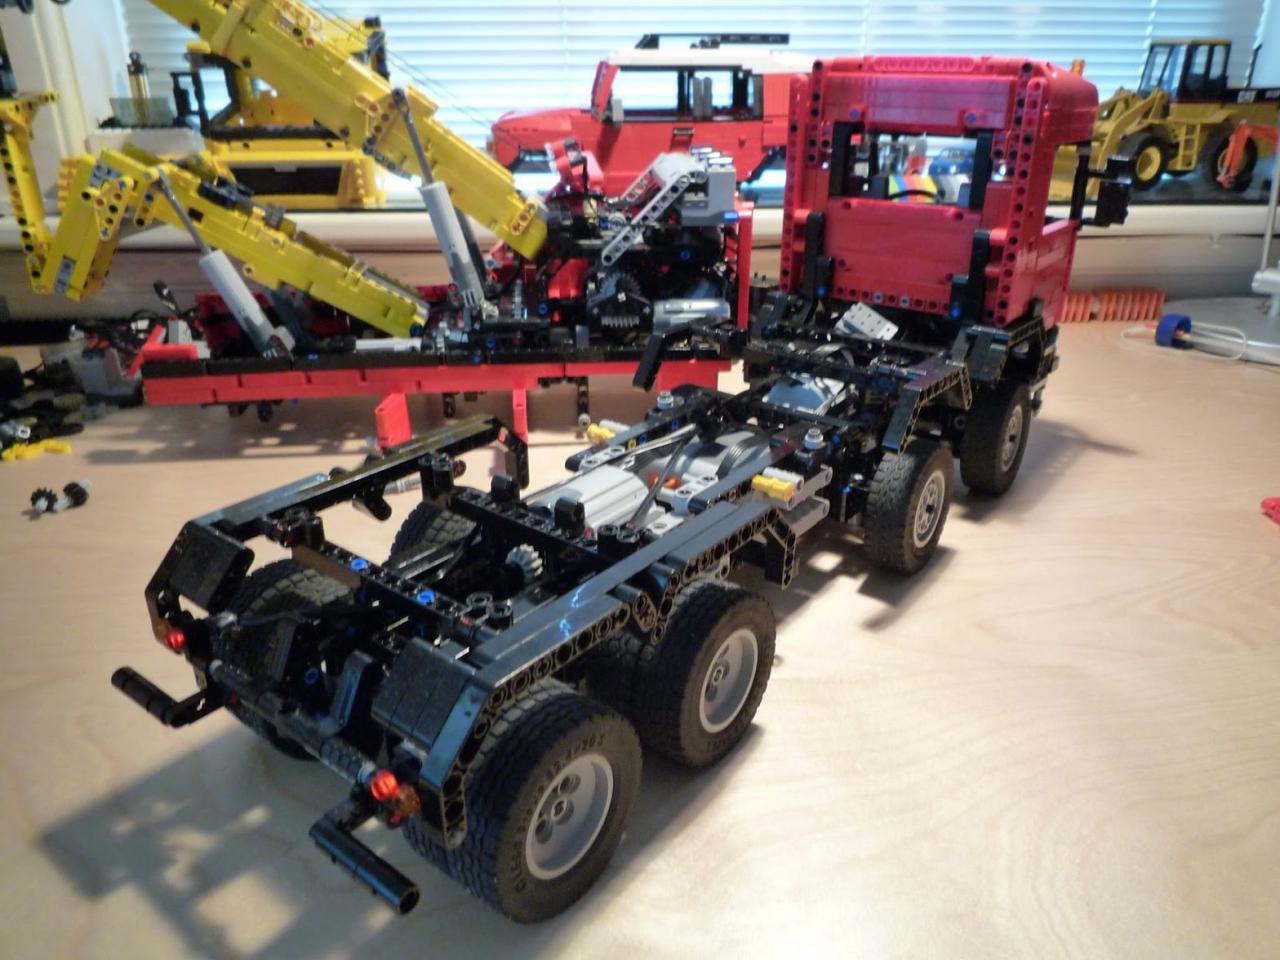 MOC-0583 Scania 8x8 Extreme tow truck by JaapTechnic